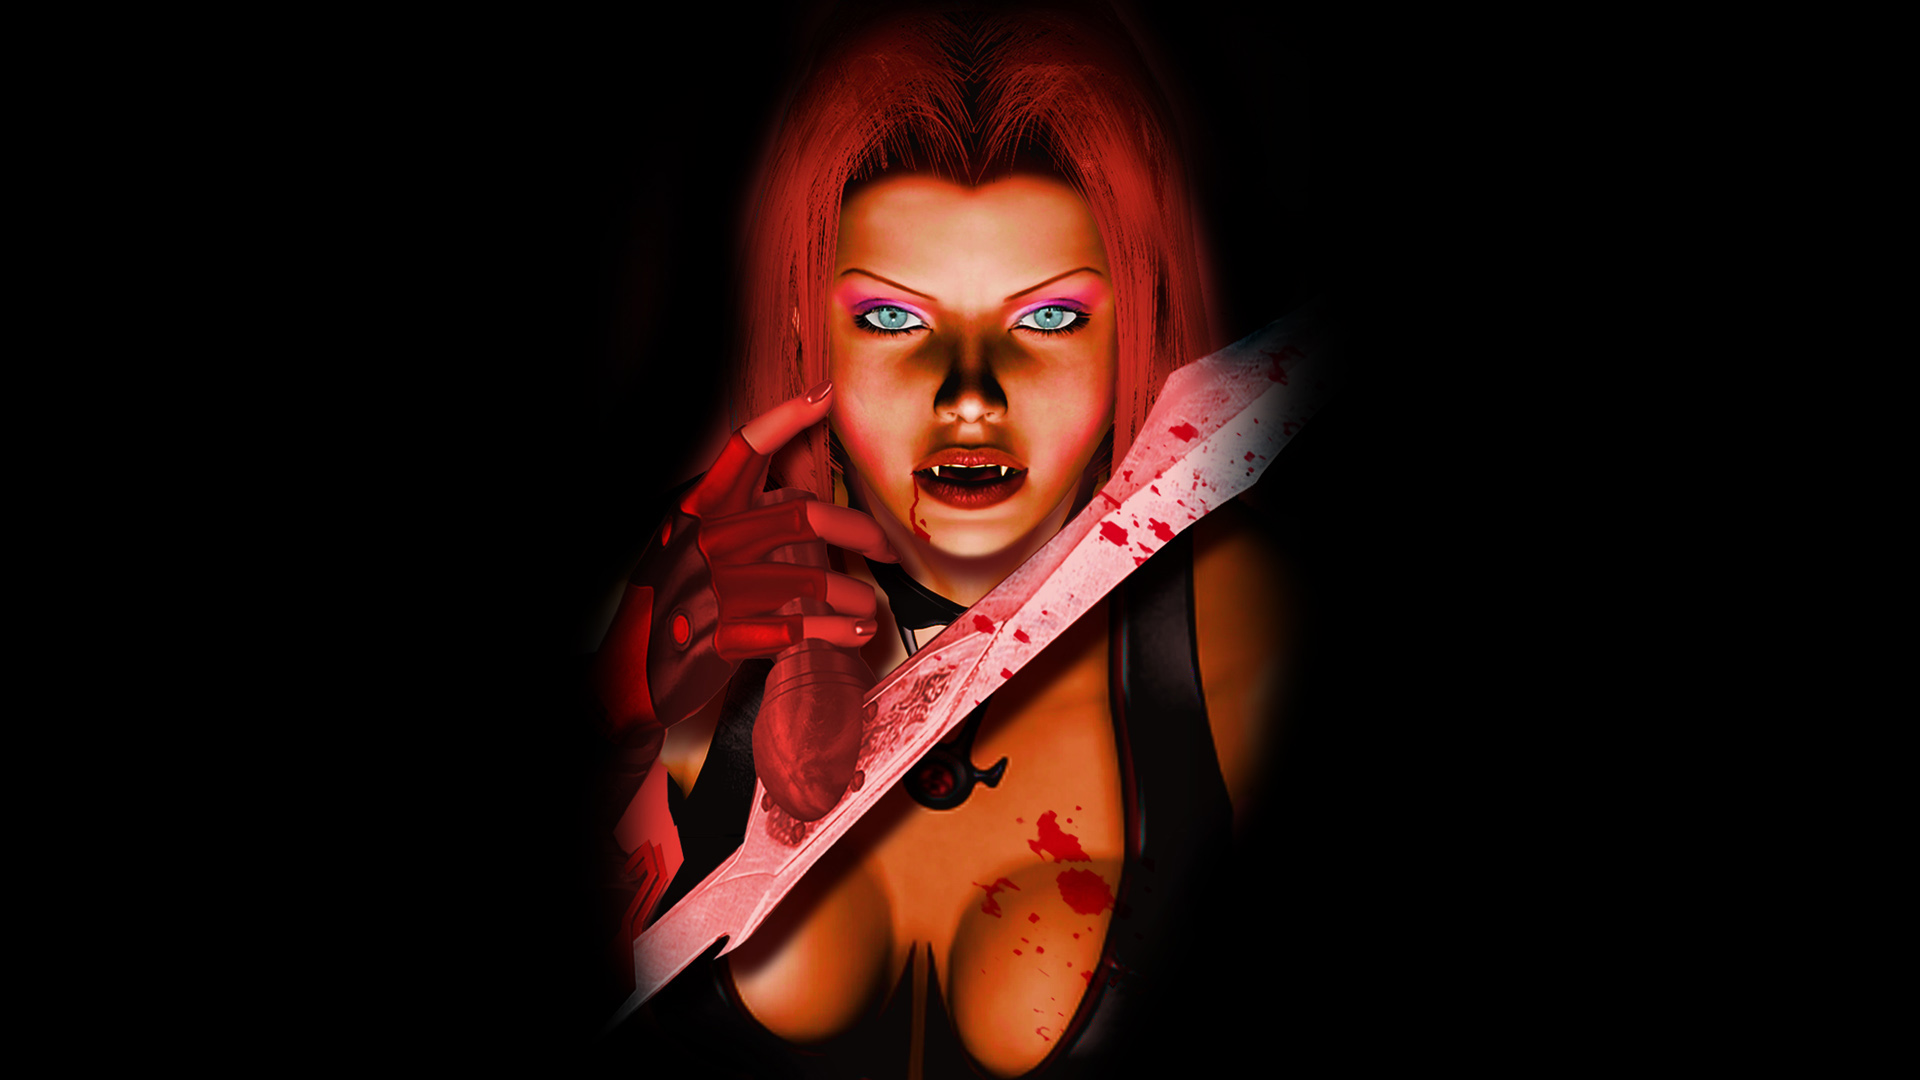 Bloodrayne Movie Wallpaper Image In Collection